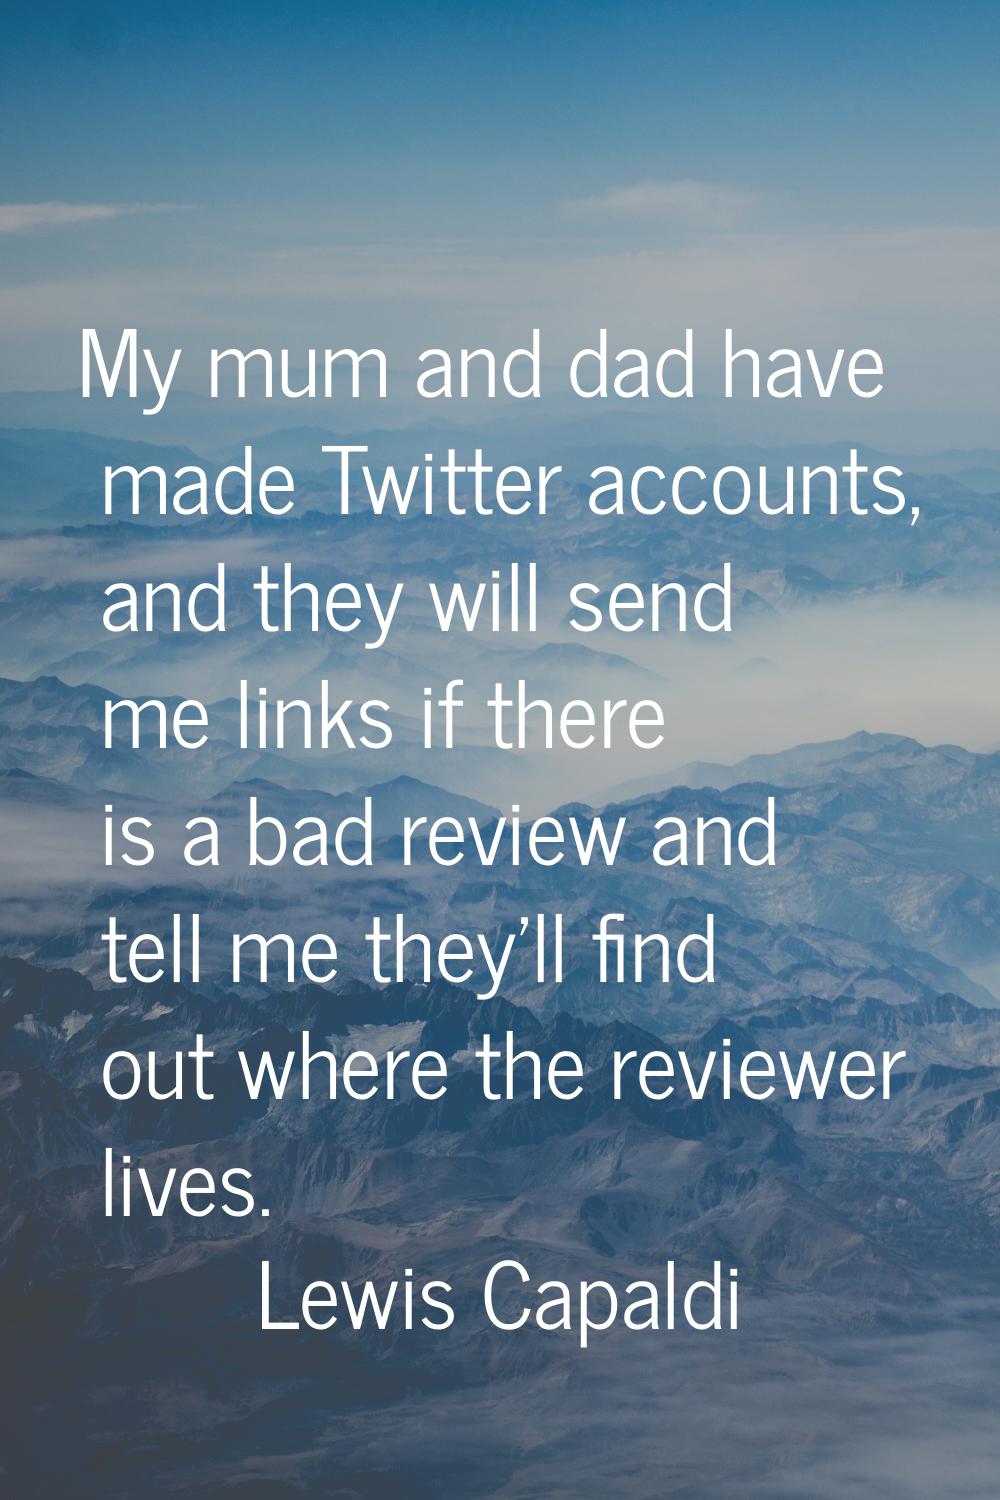 My mum and dad have made Twitter accounts, and they will send me links if there is a bad review and